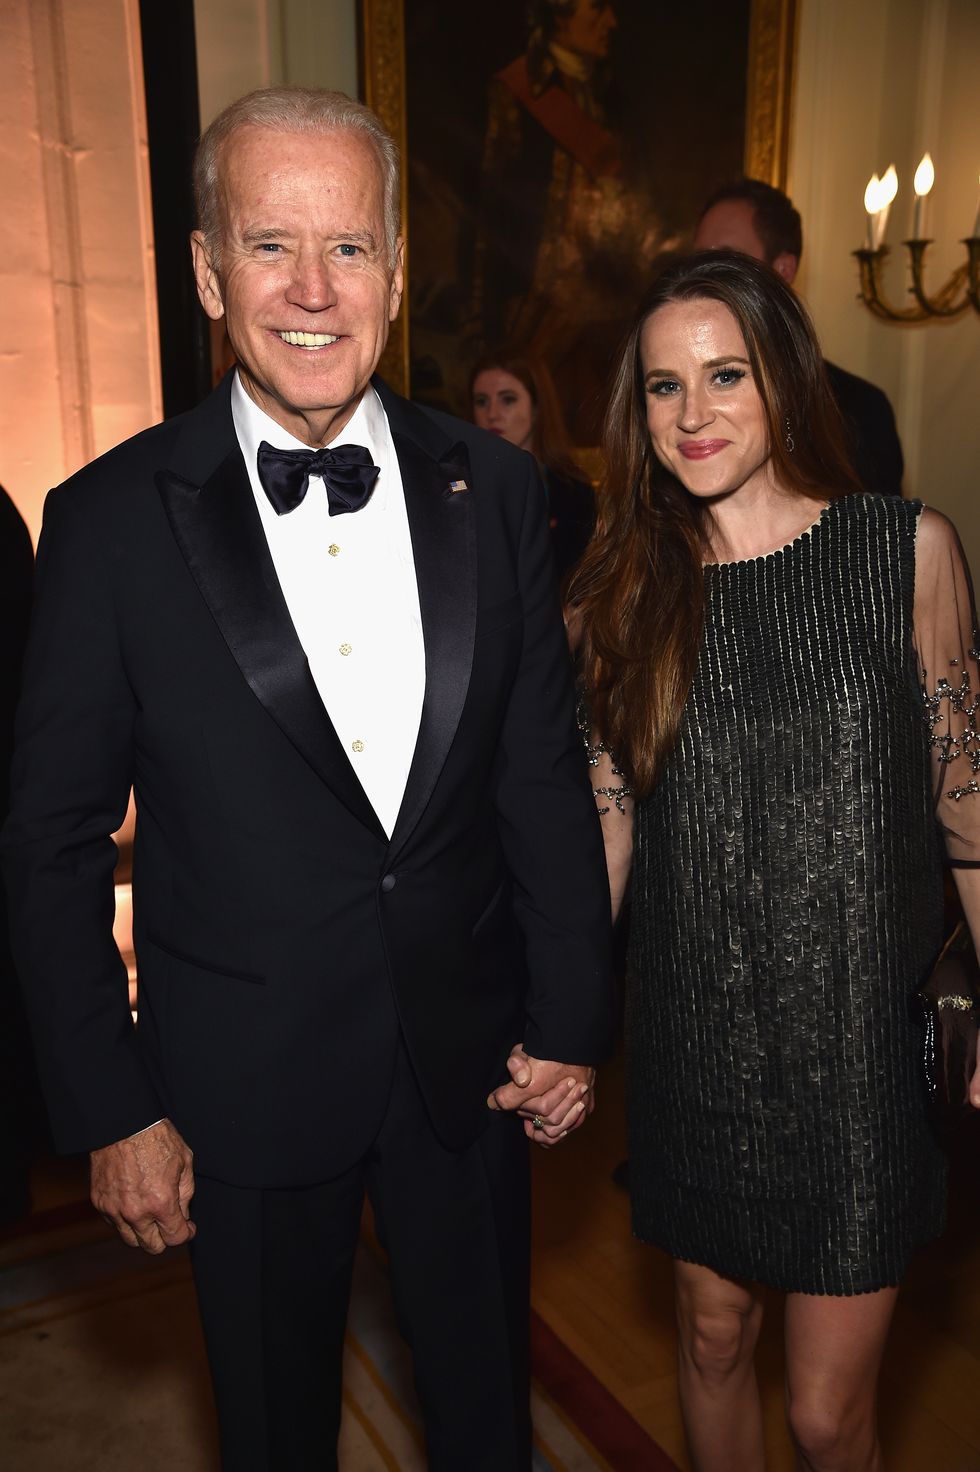 washington, dc   april 30 vice president of the united states, joe biden and ashley biden attend the bloomberg  vanity fair cocktail reception following the 2015 whca dinner at the residence of the french ambassador on april 30, 2016 in washington, dc  photo by dimitrios kambourisvf16wireimage